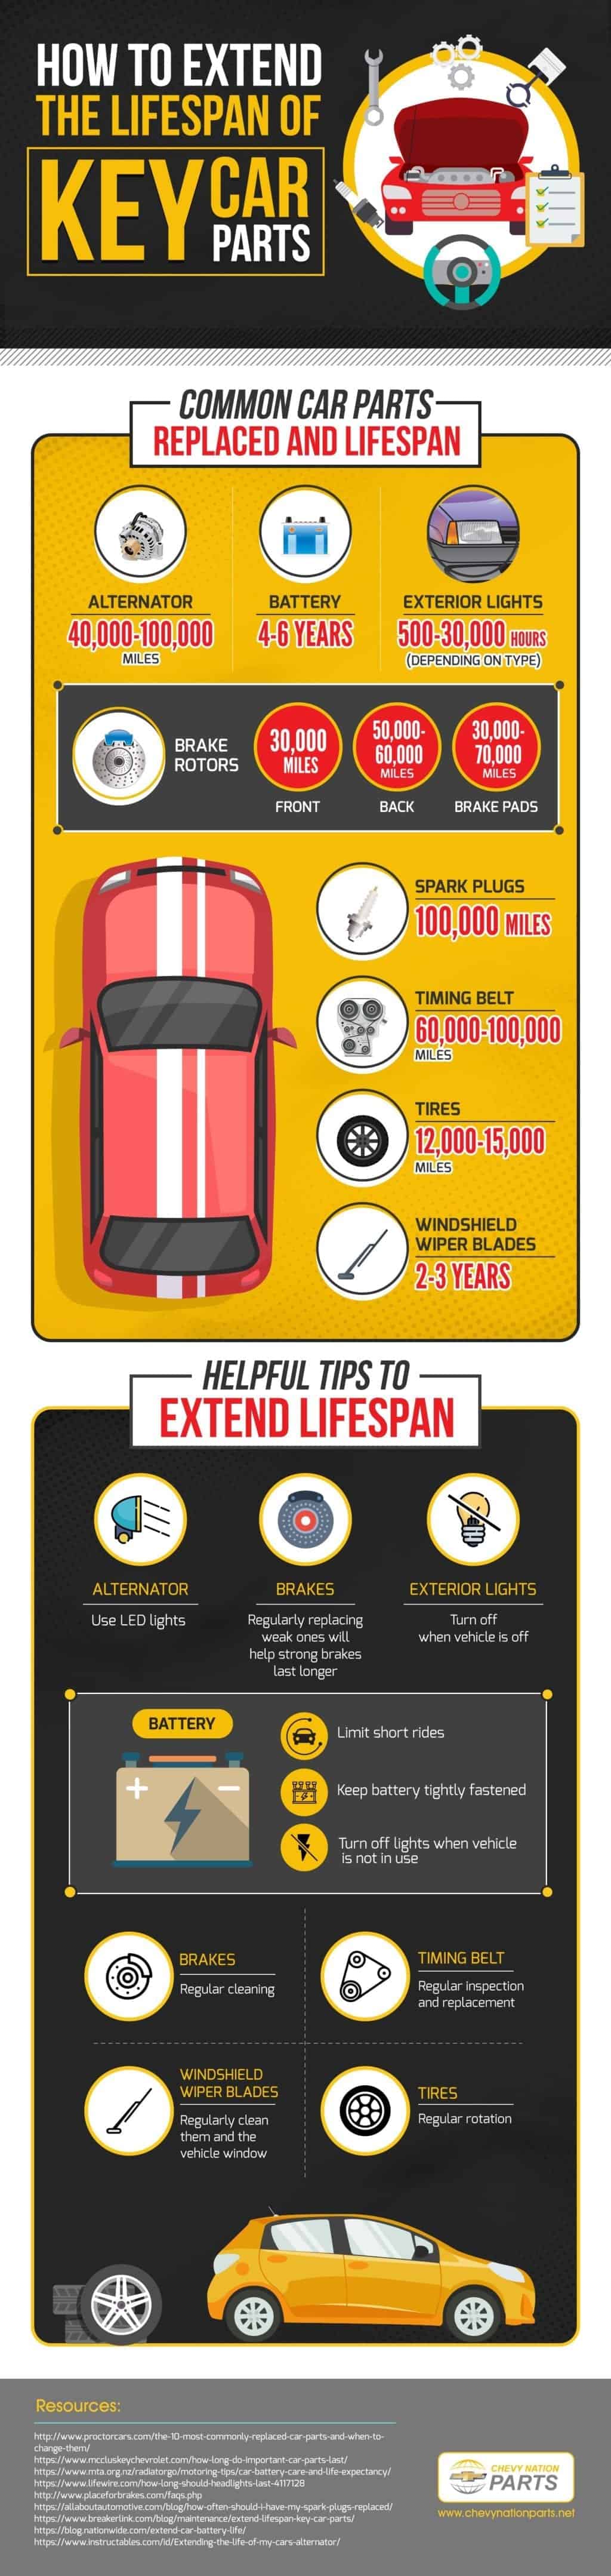 How to Extend the Lifespan Of Key Car Parts (Infographic)